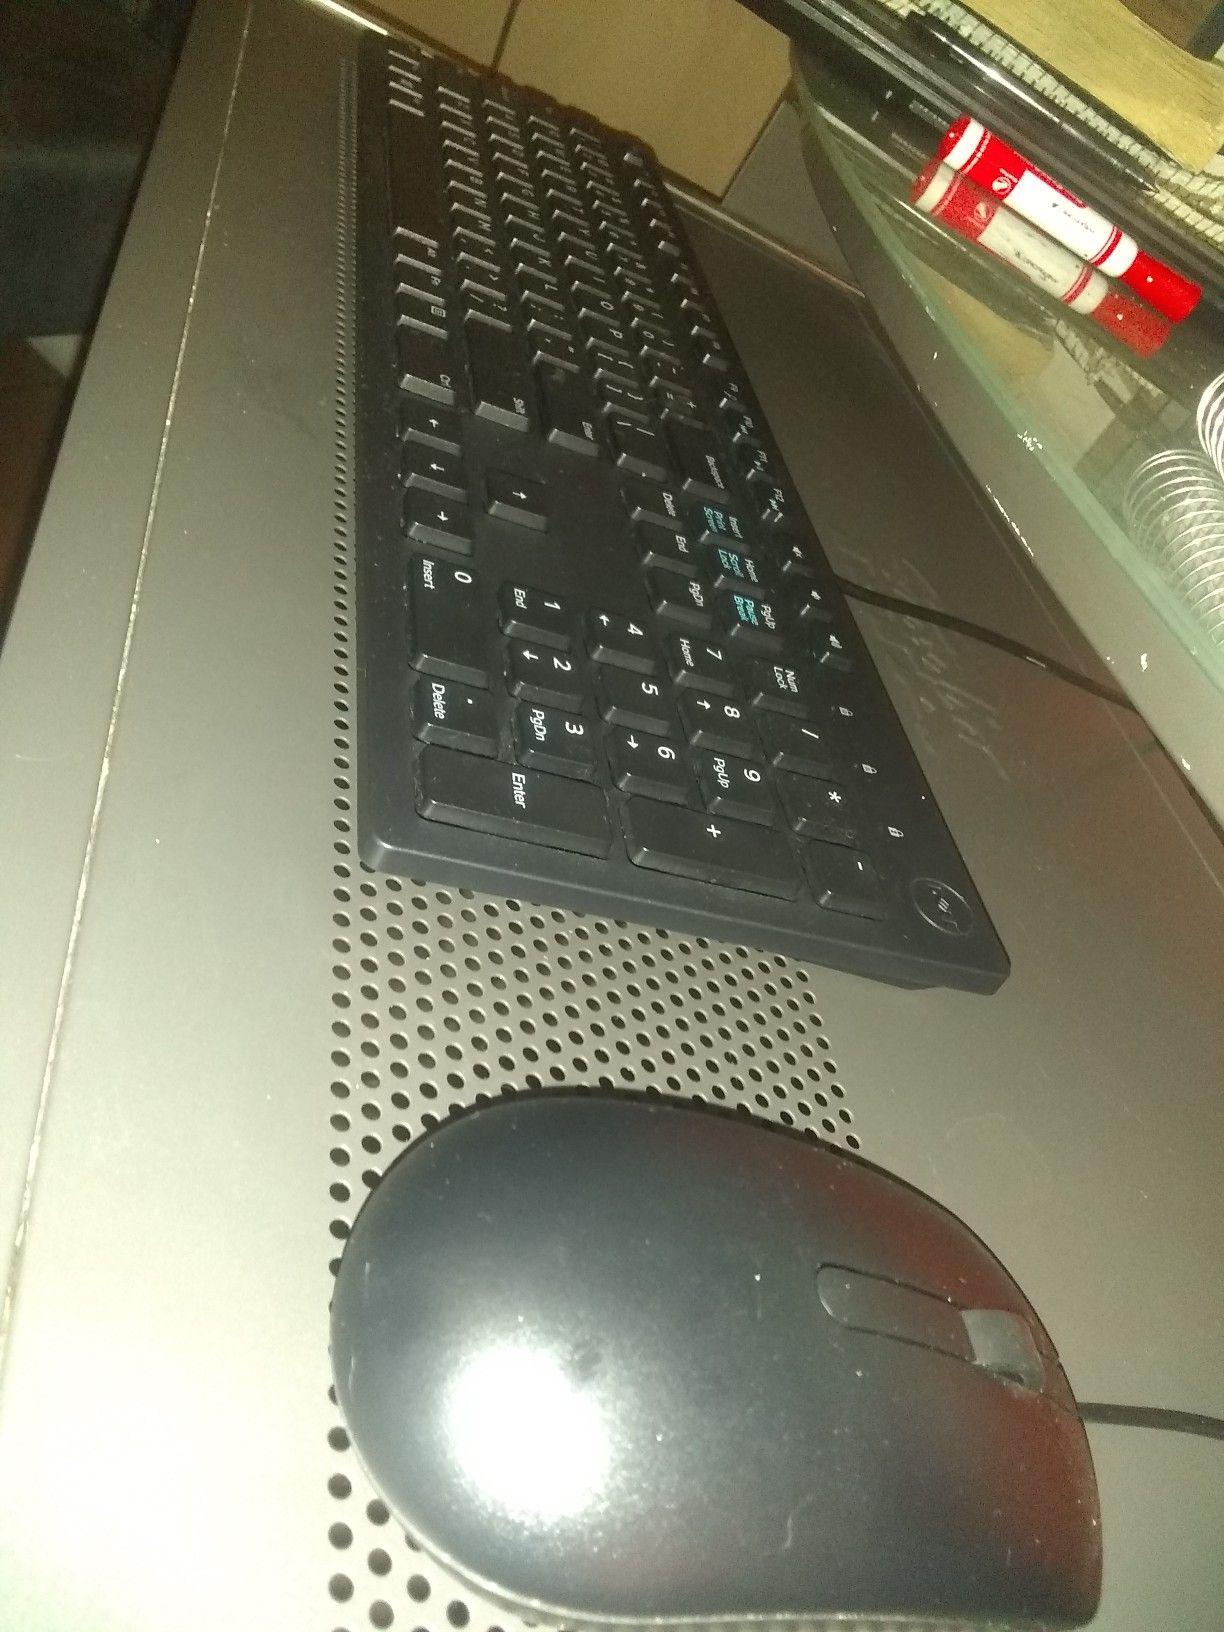 Hp z 420 computer with monitor keyboard and mouse.